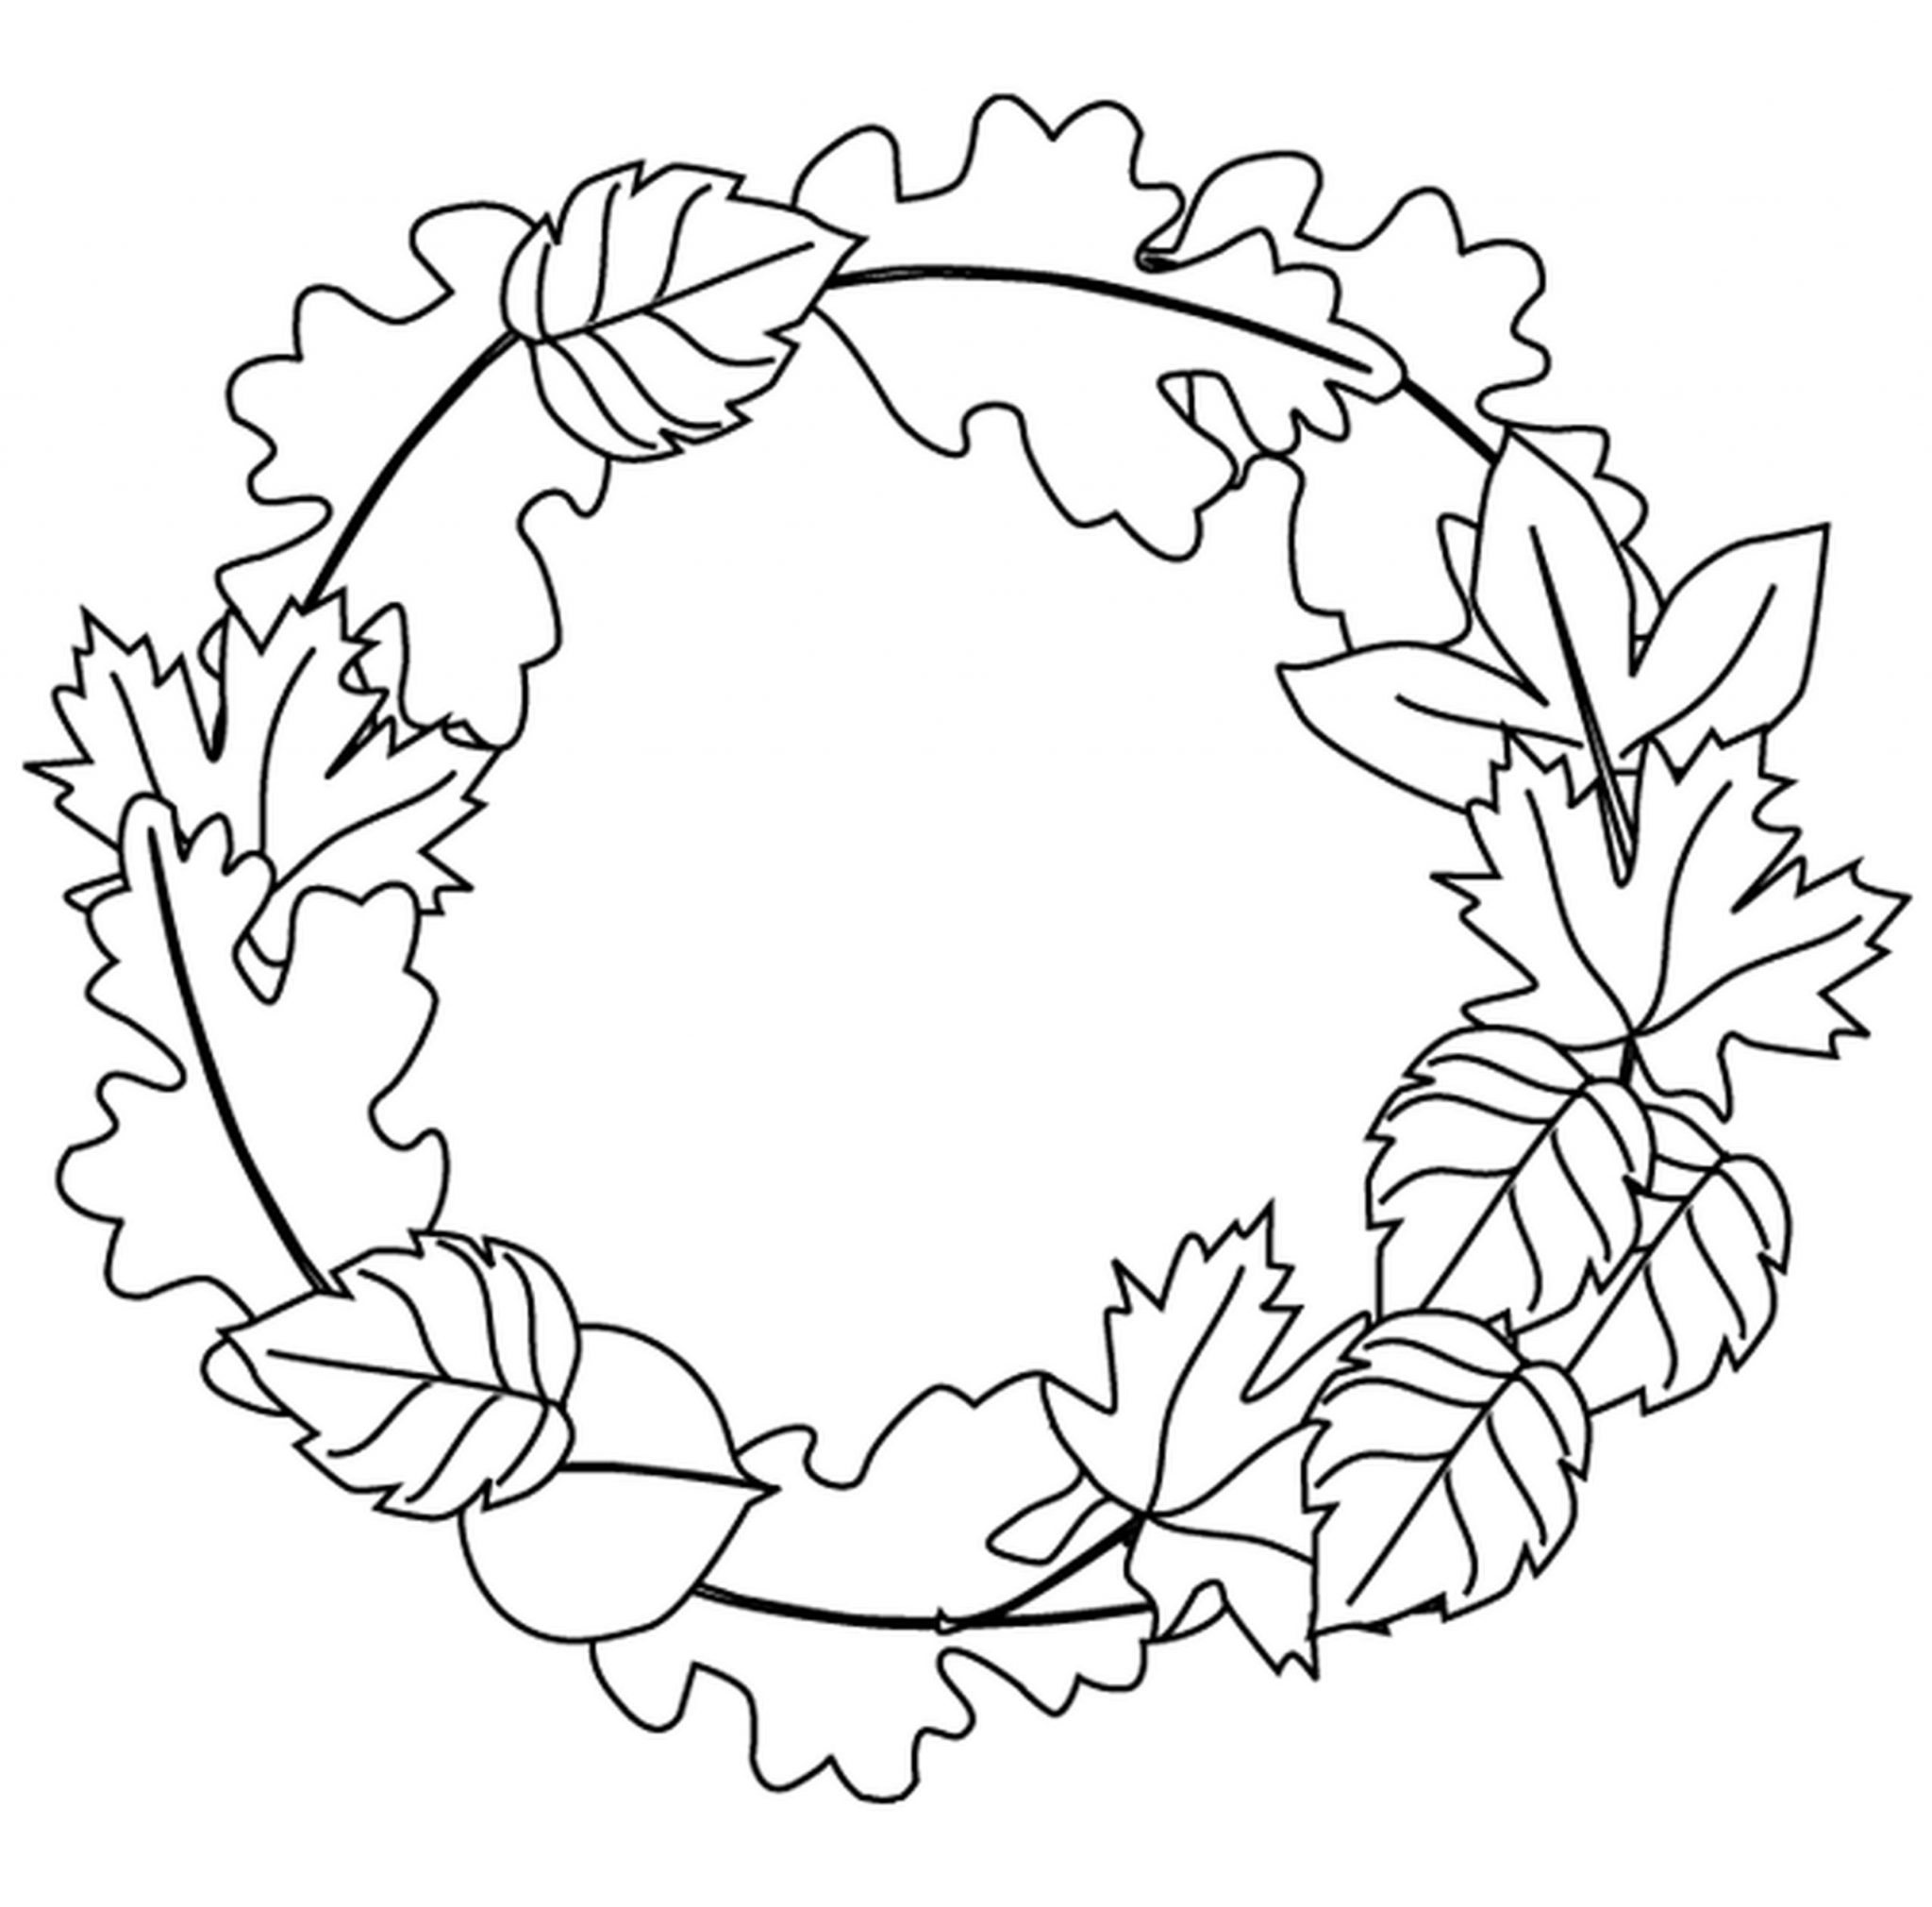 easy-preschool-fall-leaves-coloring-pages ...